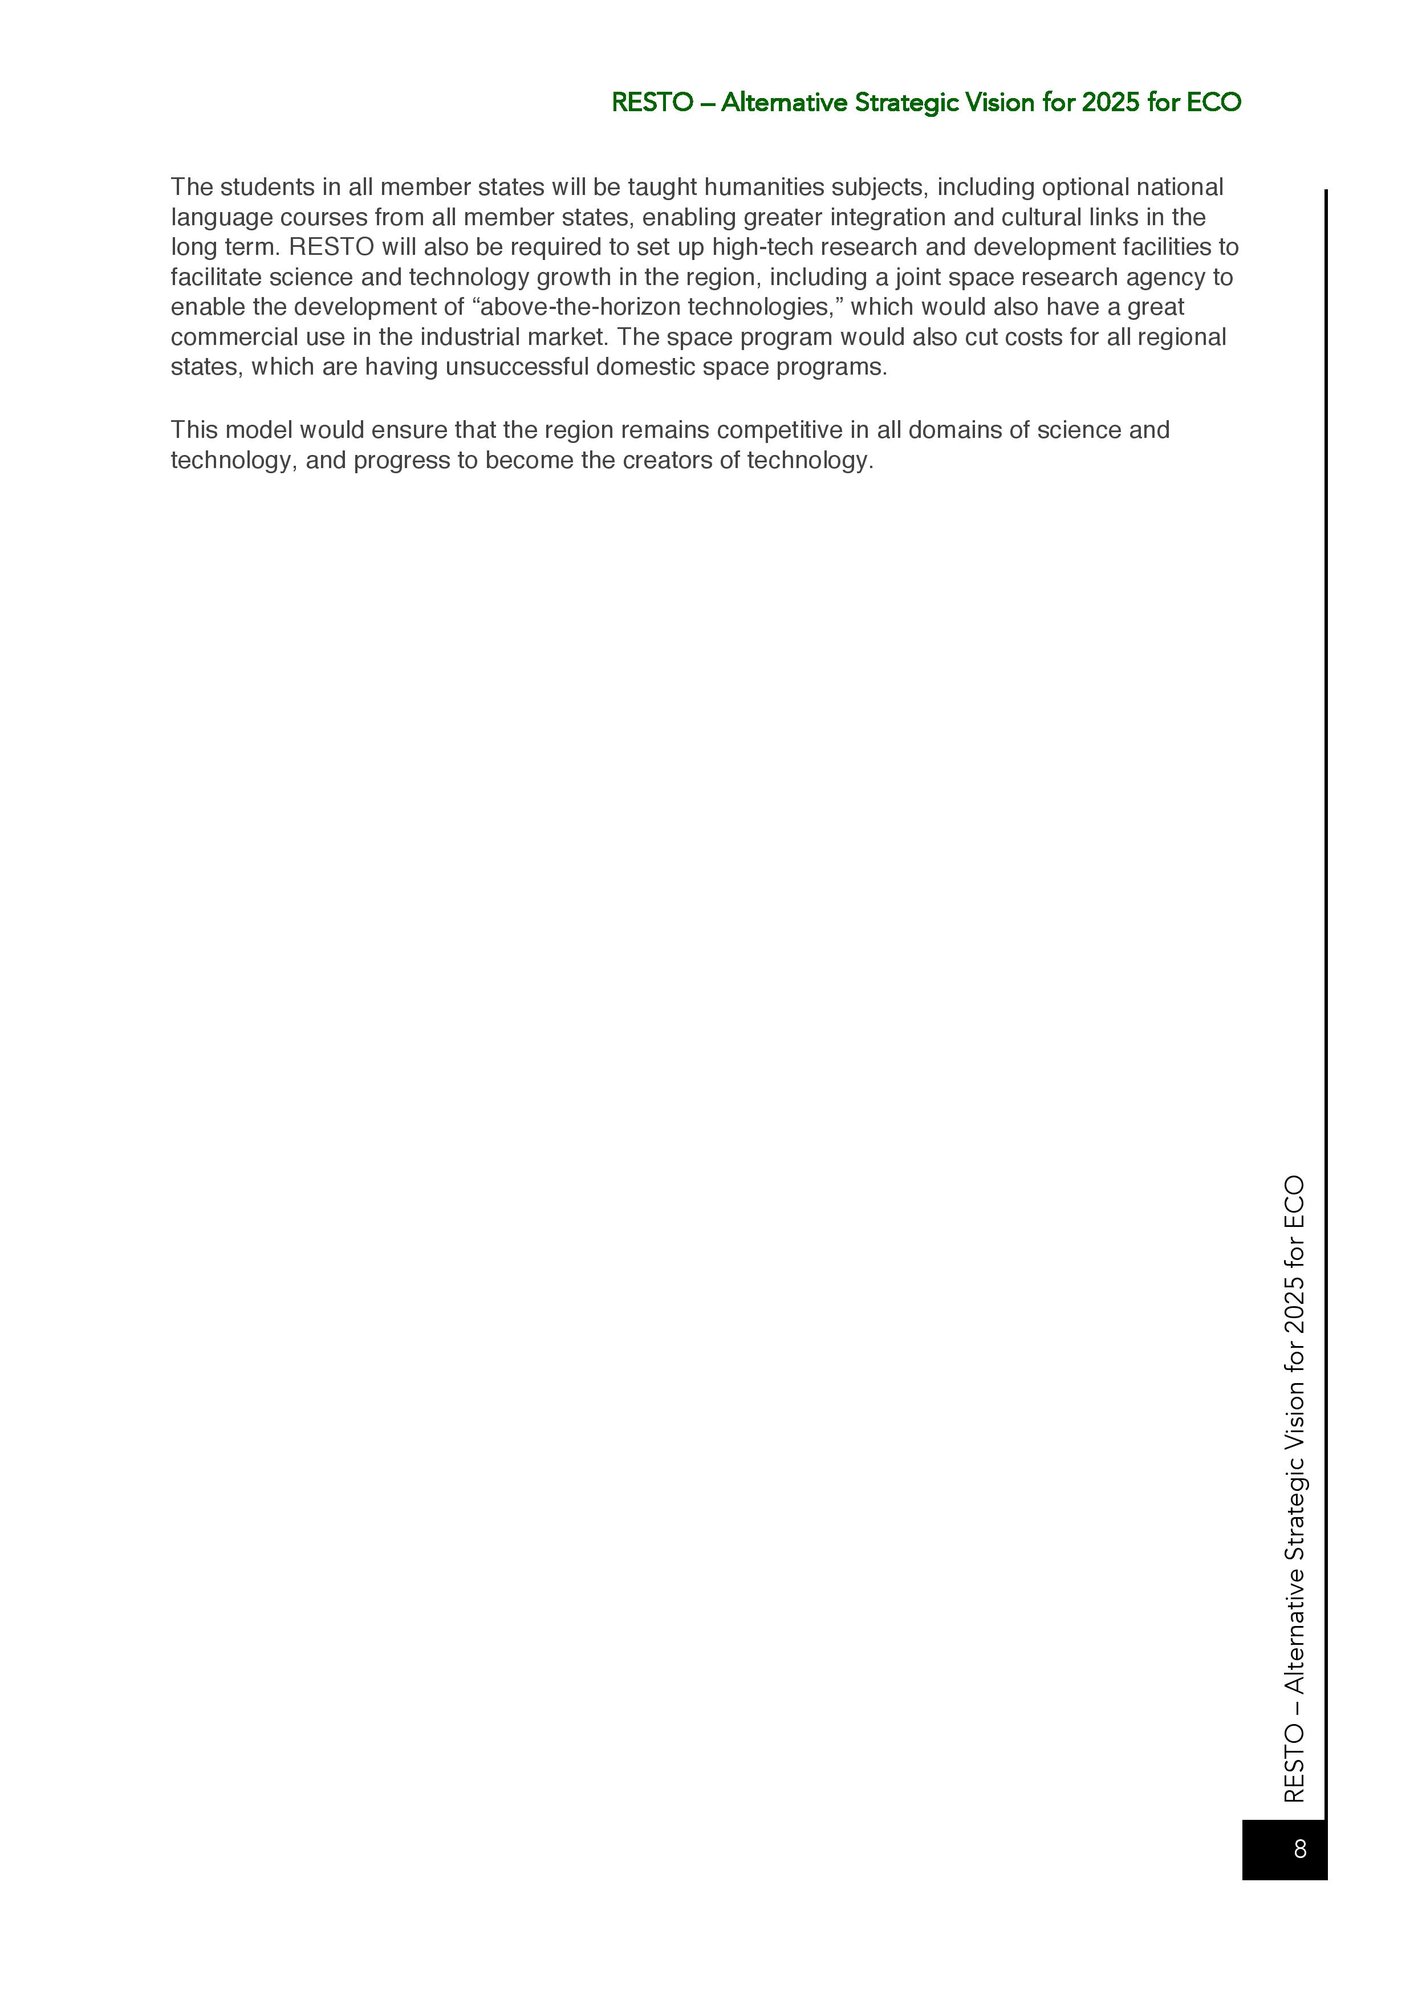 Document-page-008.jpg